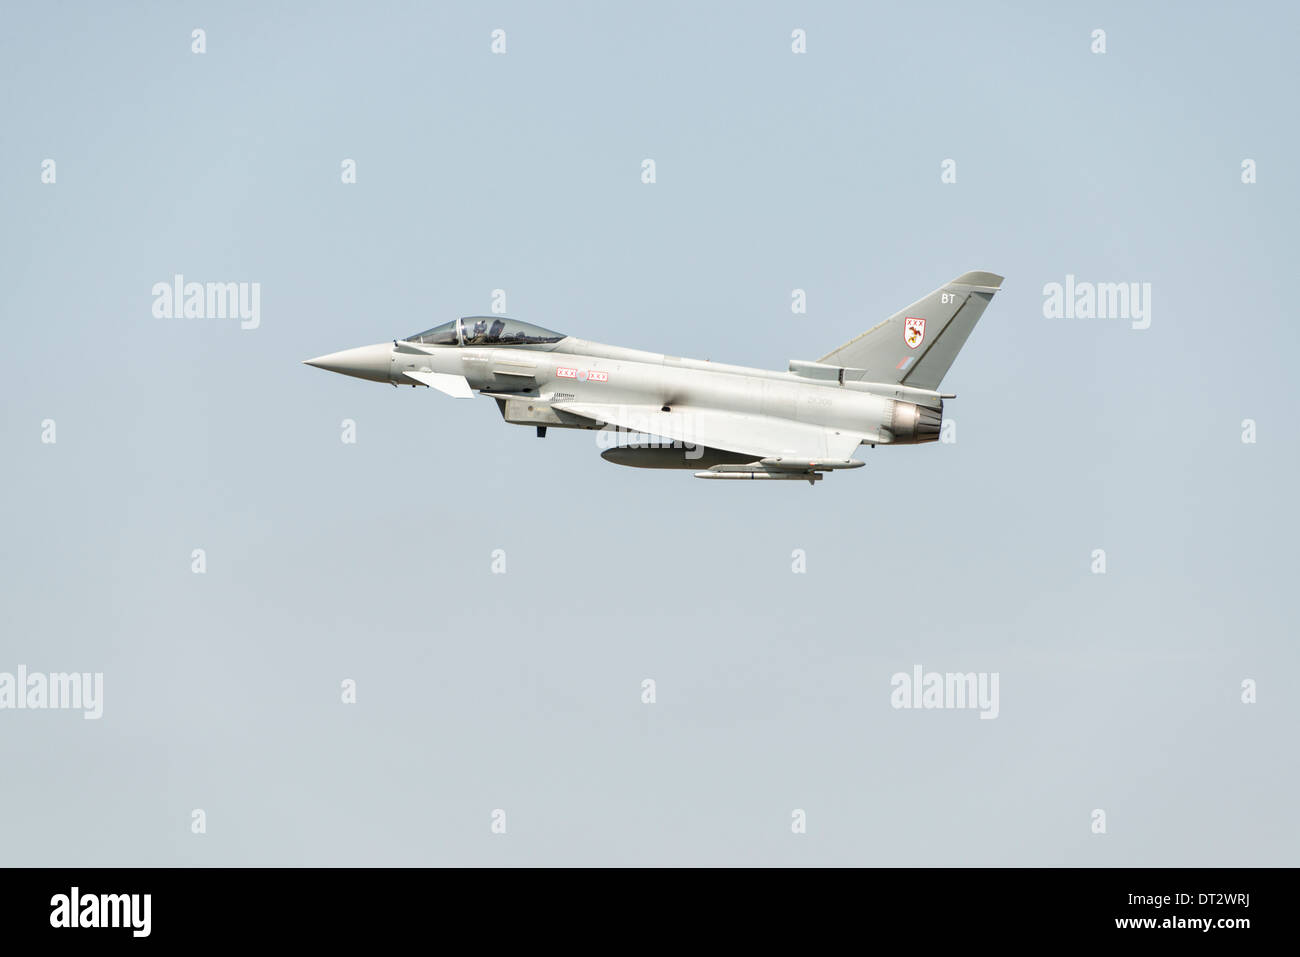 British Royal Air Force Eurofighter FGR4 Typhoon multi role fighter jet t viene visualizzato in 2013 Royal International Air Tattoo. Foto Stock